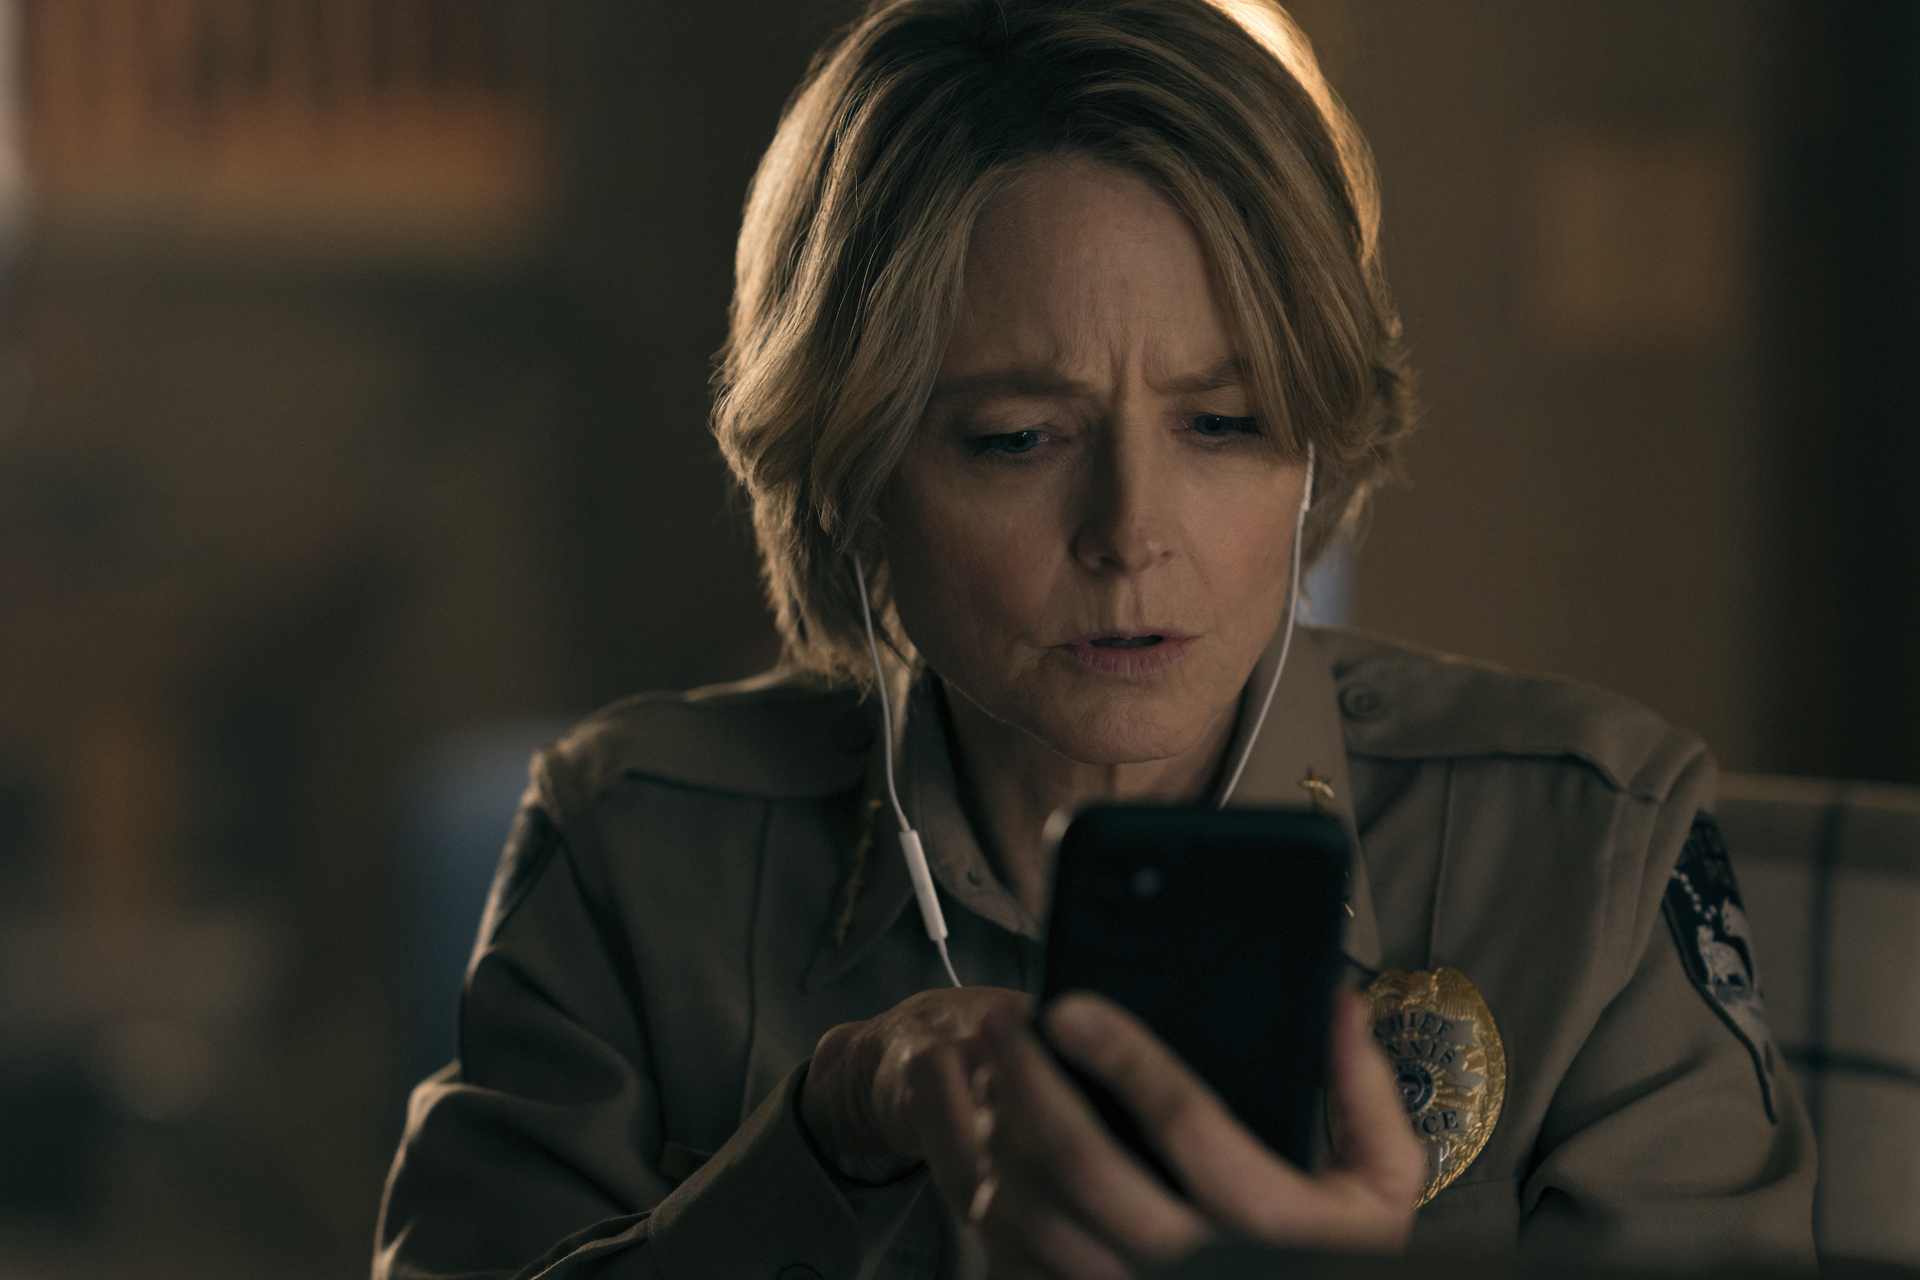 Jodie watching something on a phone with headphones in her ears in a scene from &quot;True Detective&quot;